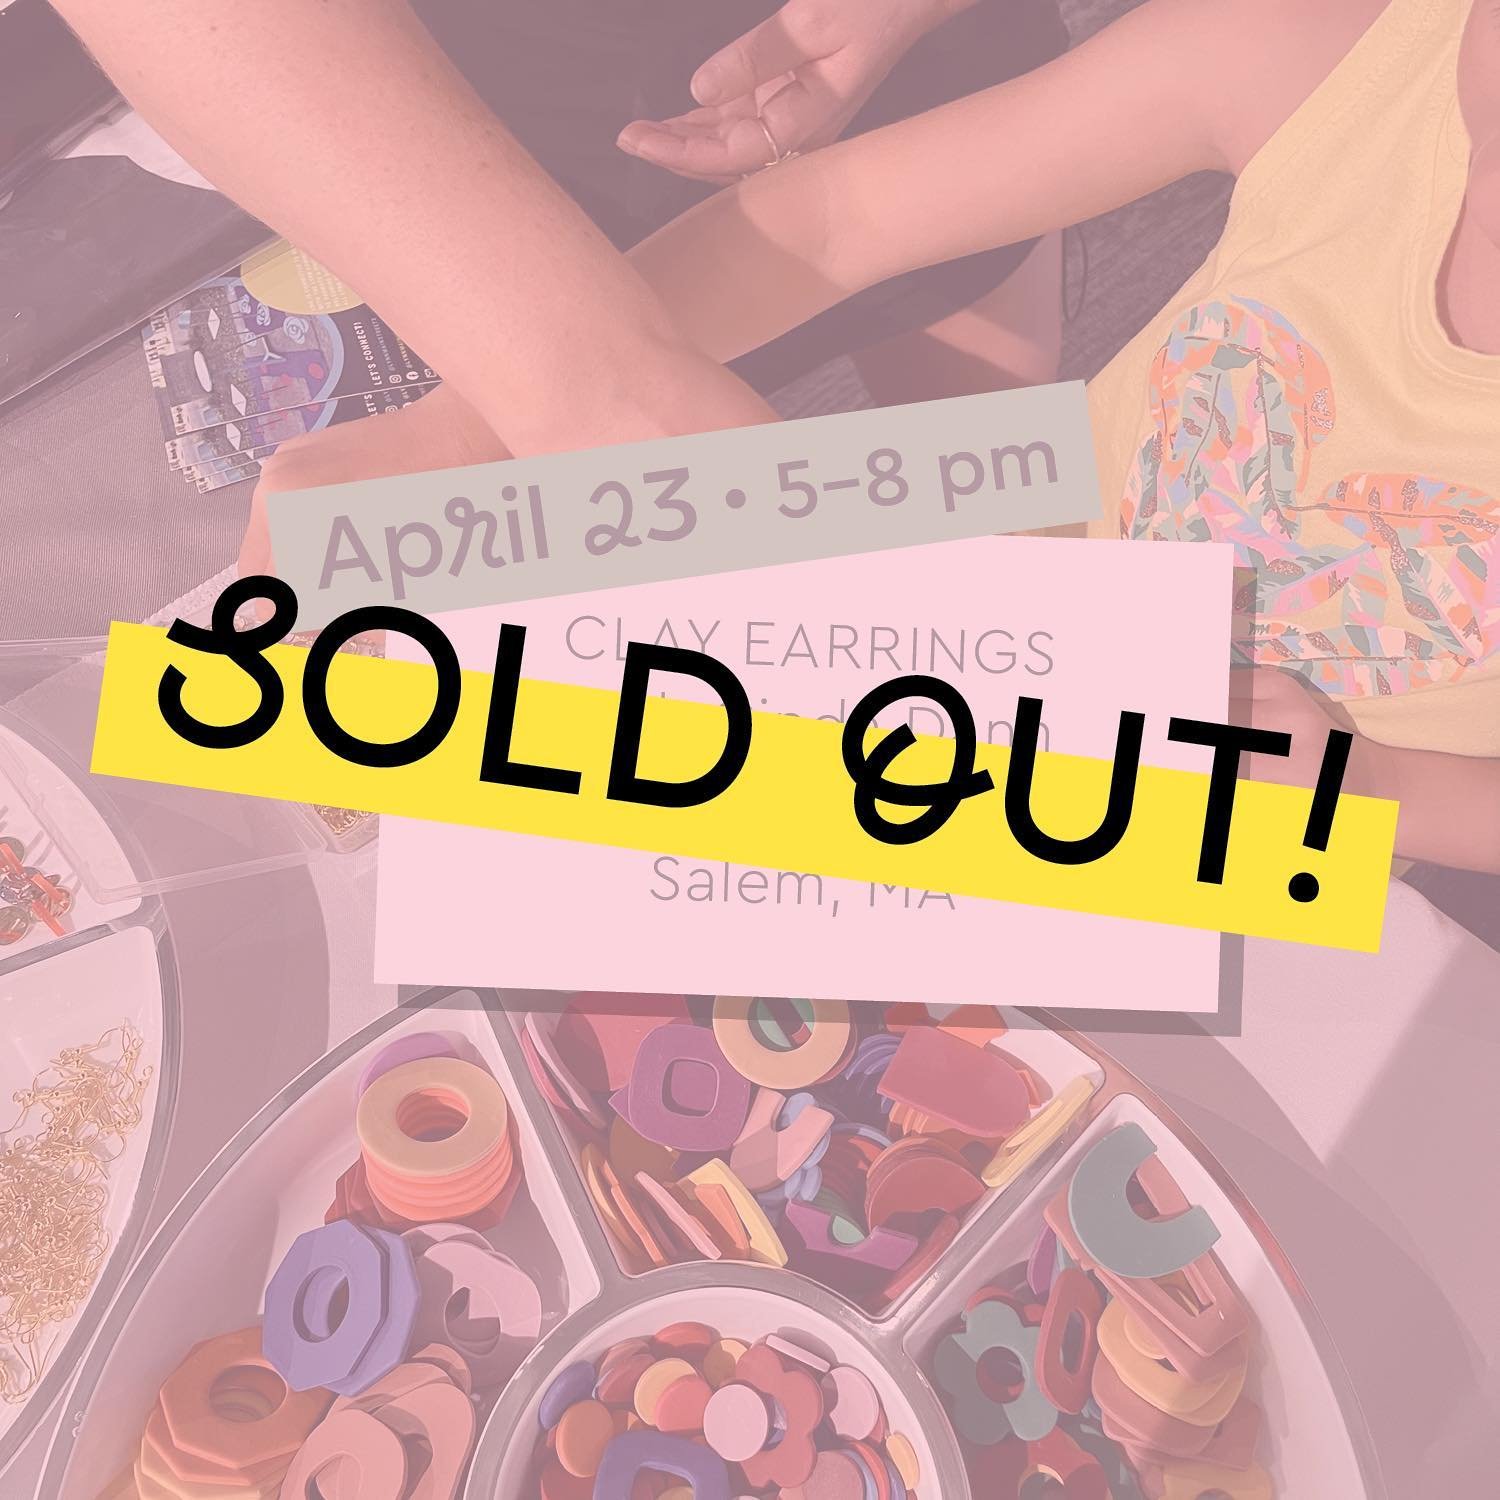 Our 4/23 workshop is officially SOLD OUT! 🥳 Join the waitlist, snag tickets early for next month&rsquo;s workshop (Chinese Paper Cutting with Elena Li on 5/23), and stay tuned for more announcements 👀 #luckyknotarts